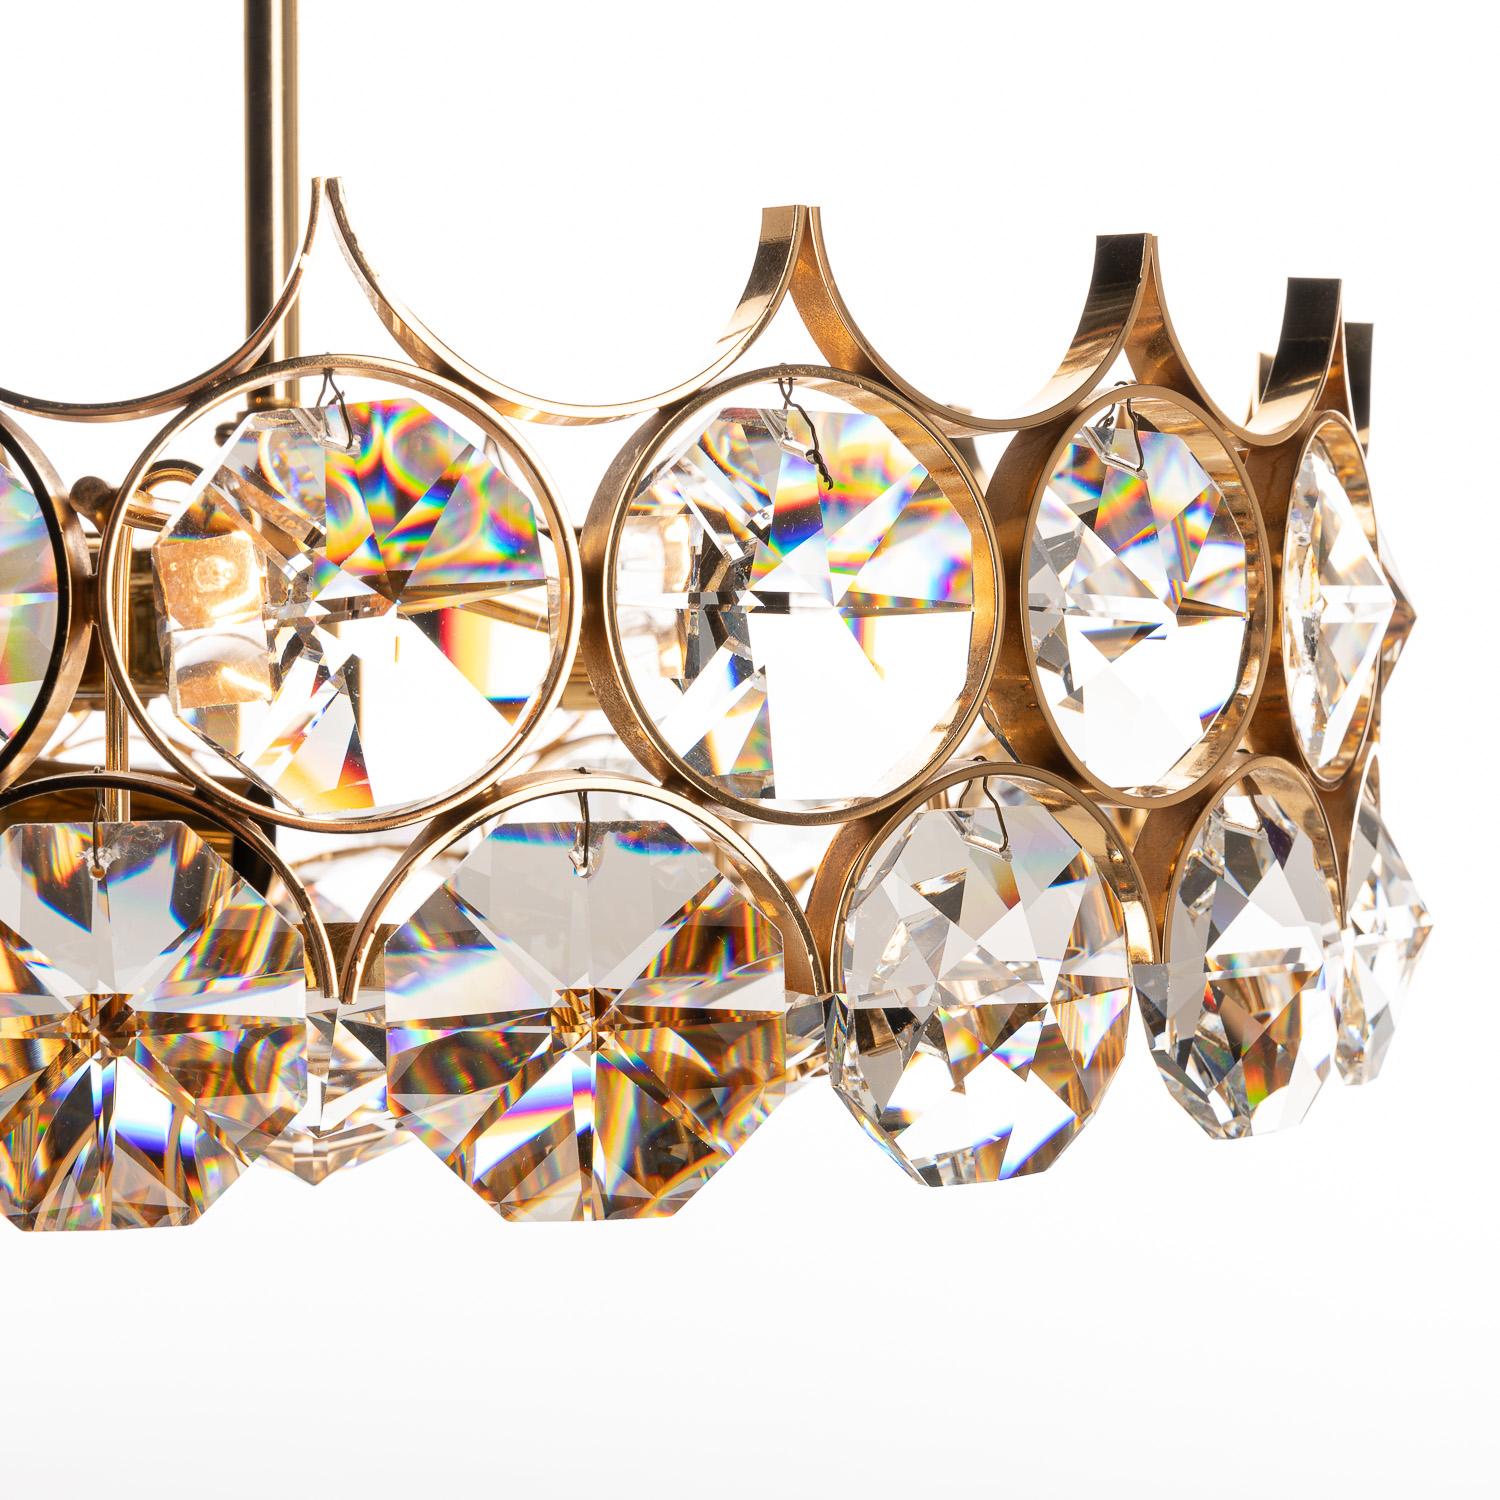 This stunning examples of a 1960s Palwa piece comes to you in absolutely dazzling condition. Flawless in appearance, the opulent blend of crystal glass and gilt-brass make this a truly special piece. The seven-light arrangement illuminates the